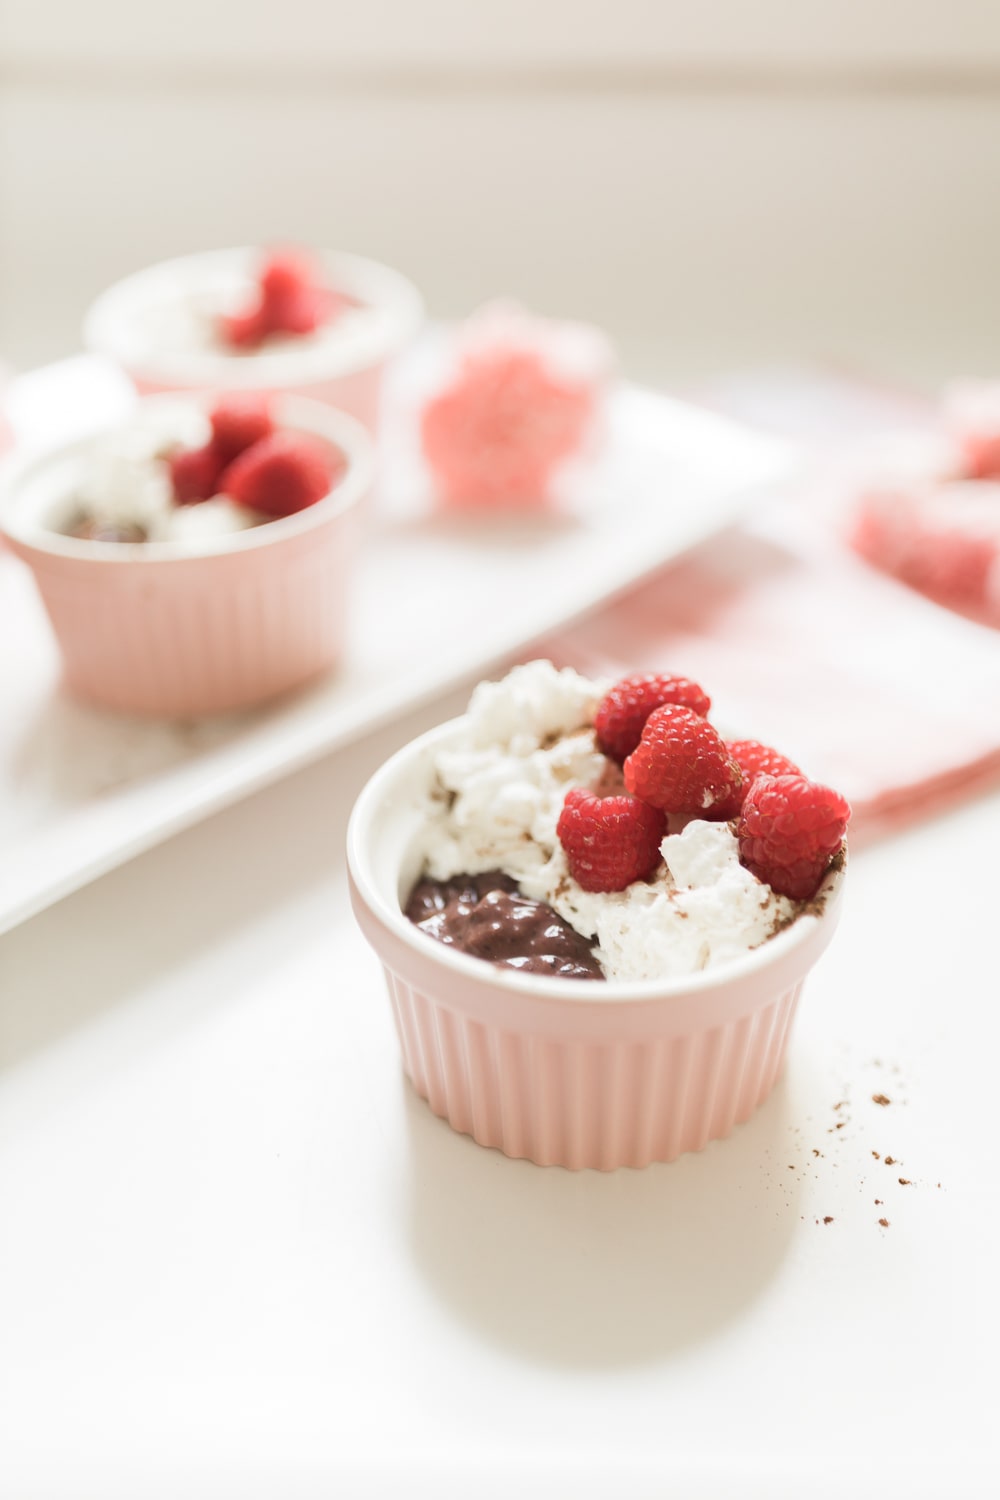 Chocolate chia seed pudding recipe by blogger Stephanie Ziajka on Diary of a Debutante